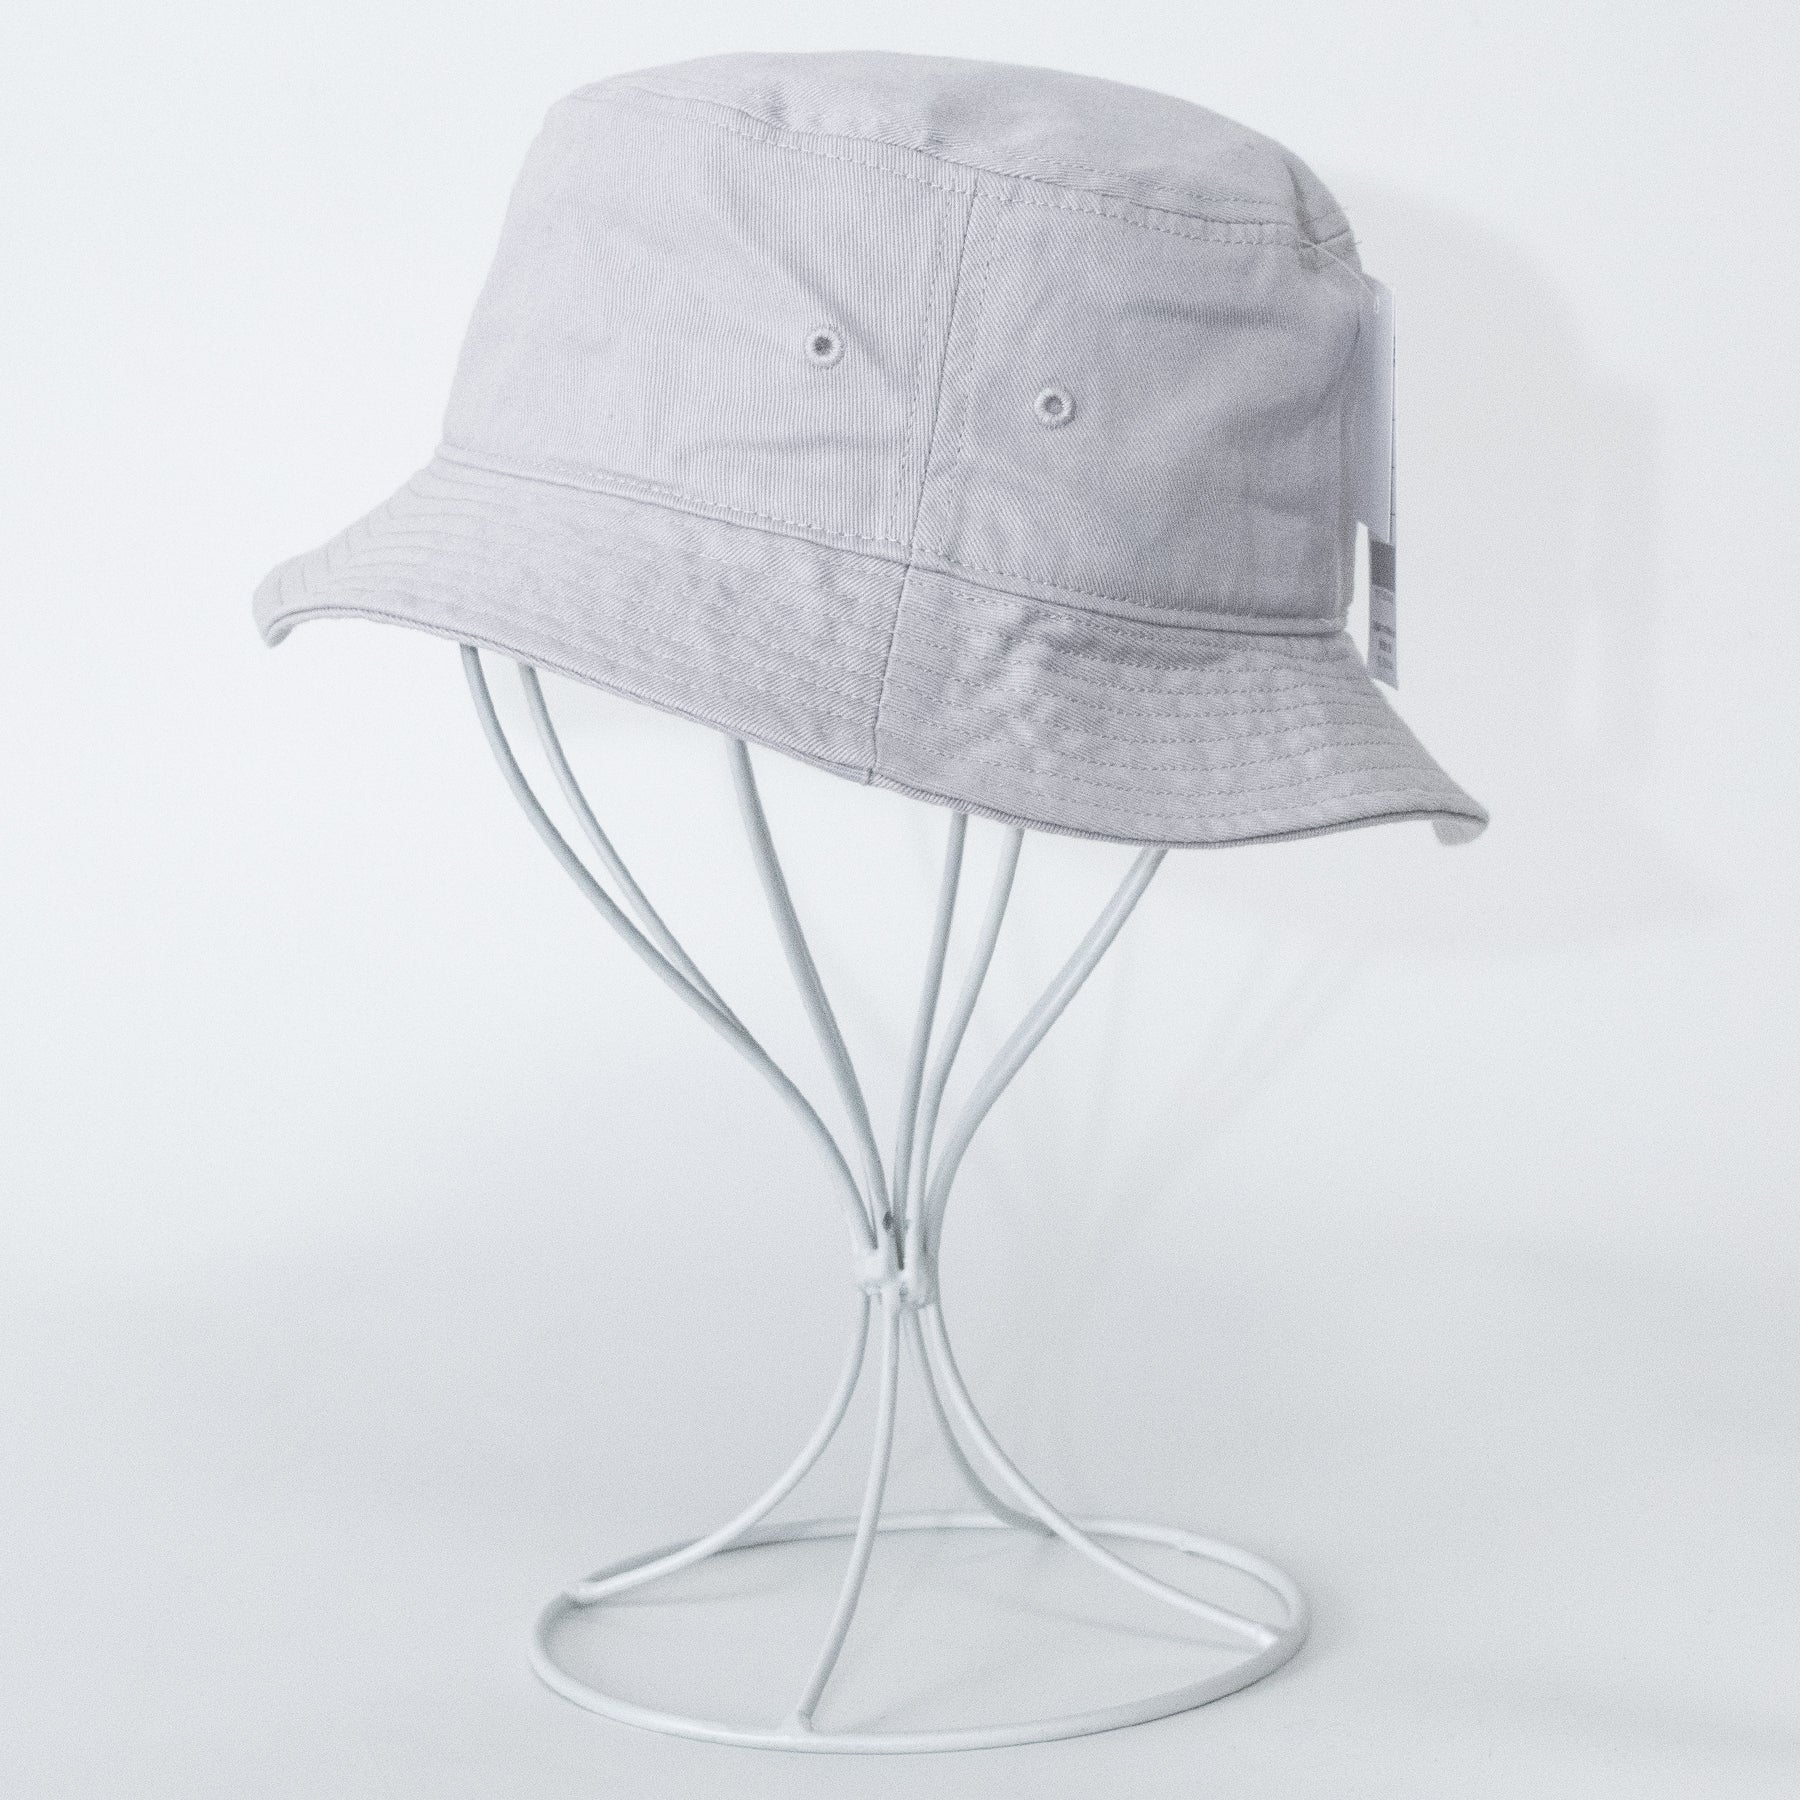 Lee Logo Embroidery Bucket Hat (3 color) - YOUAREMYPOISON